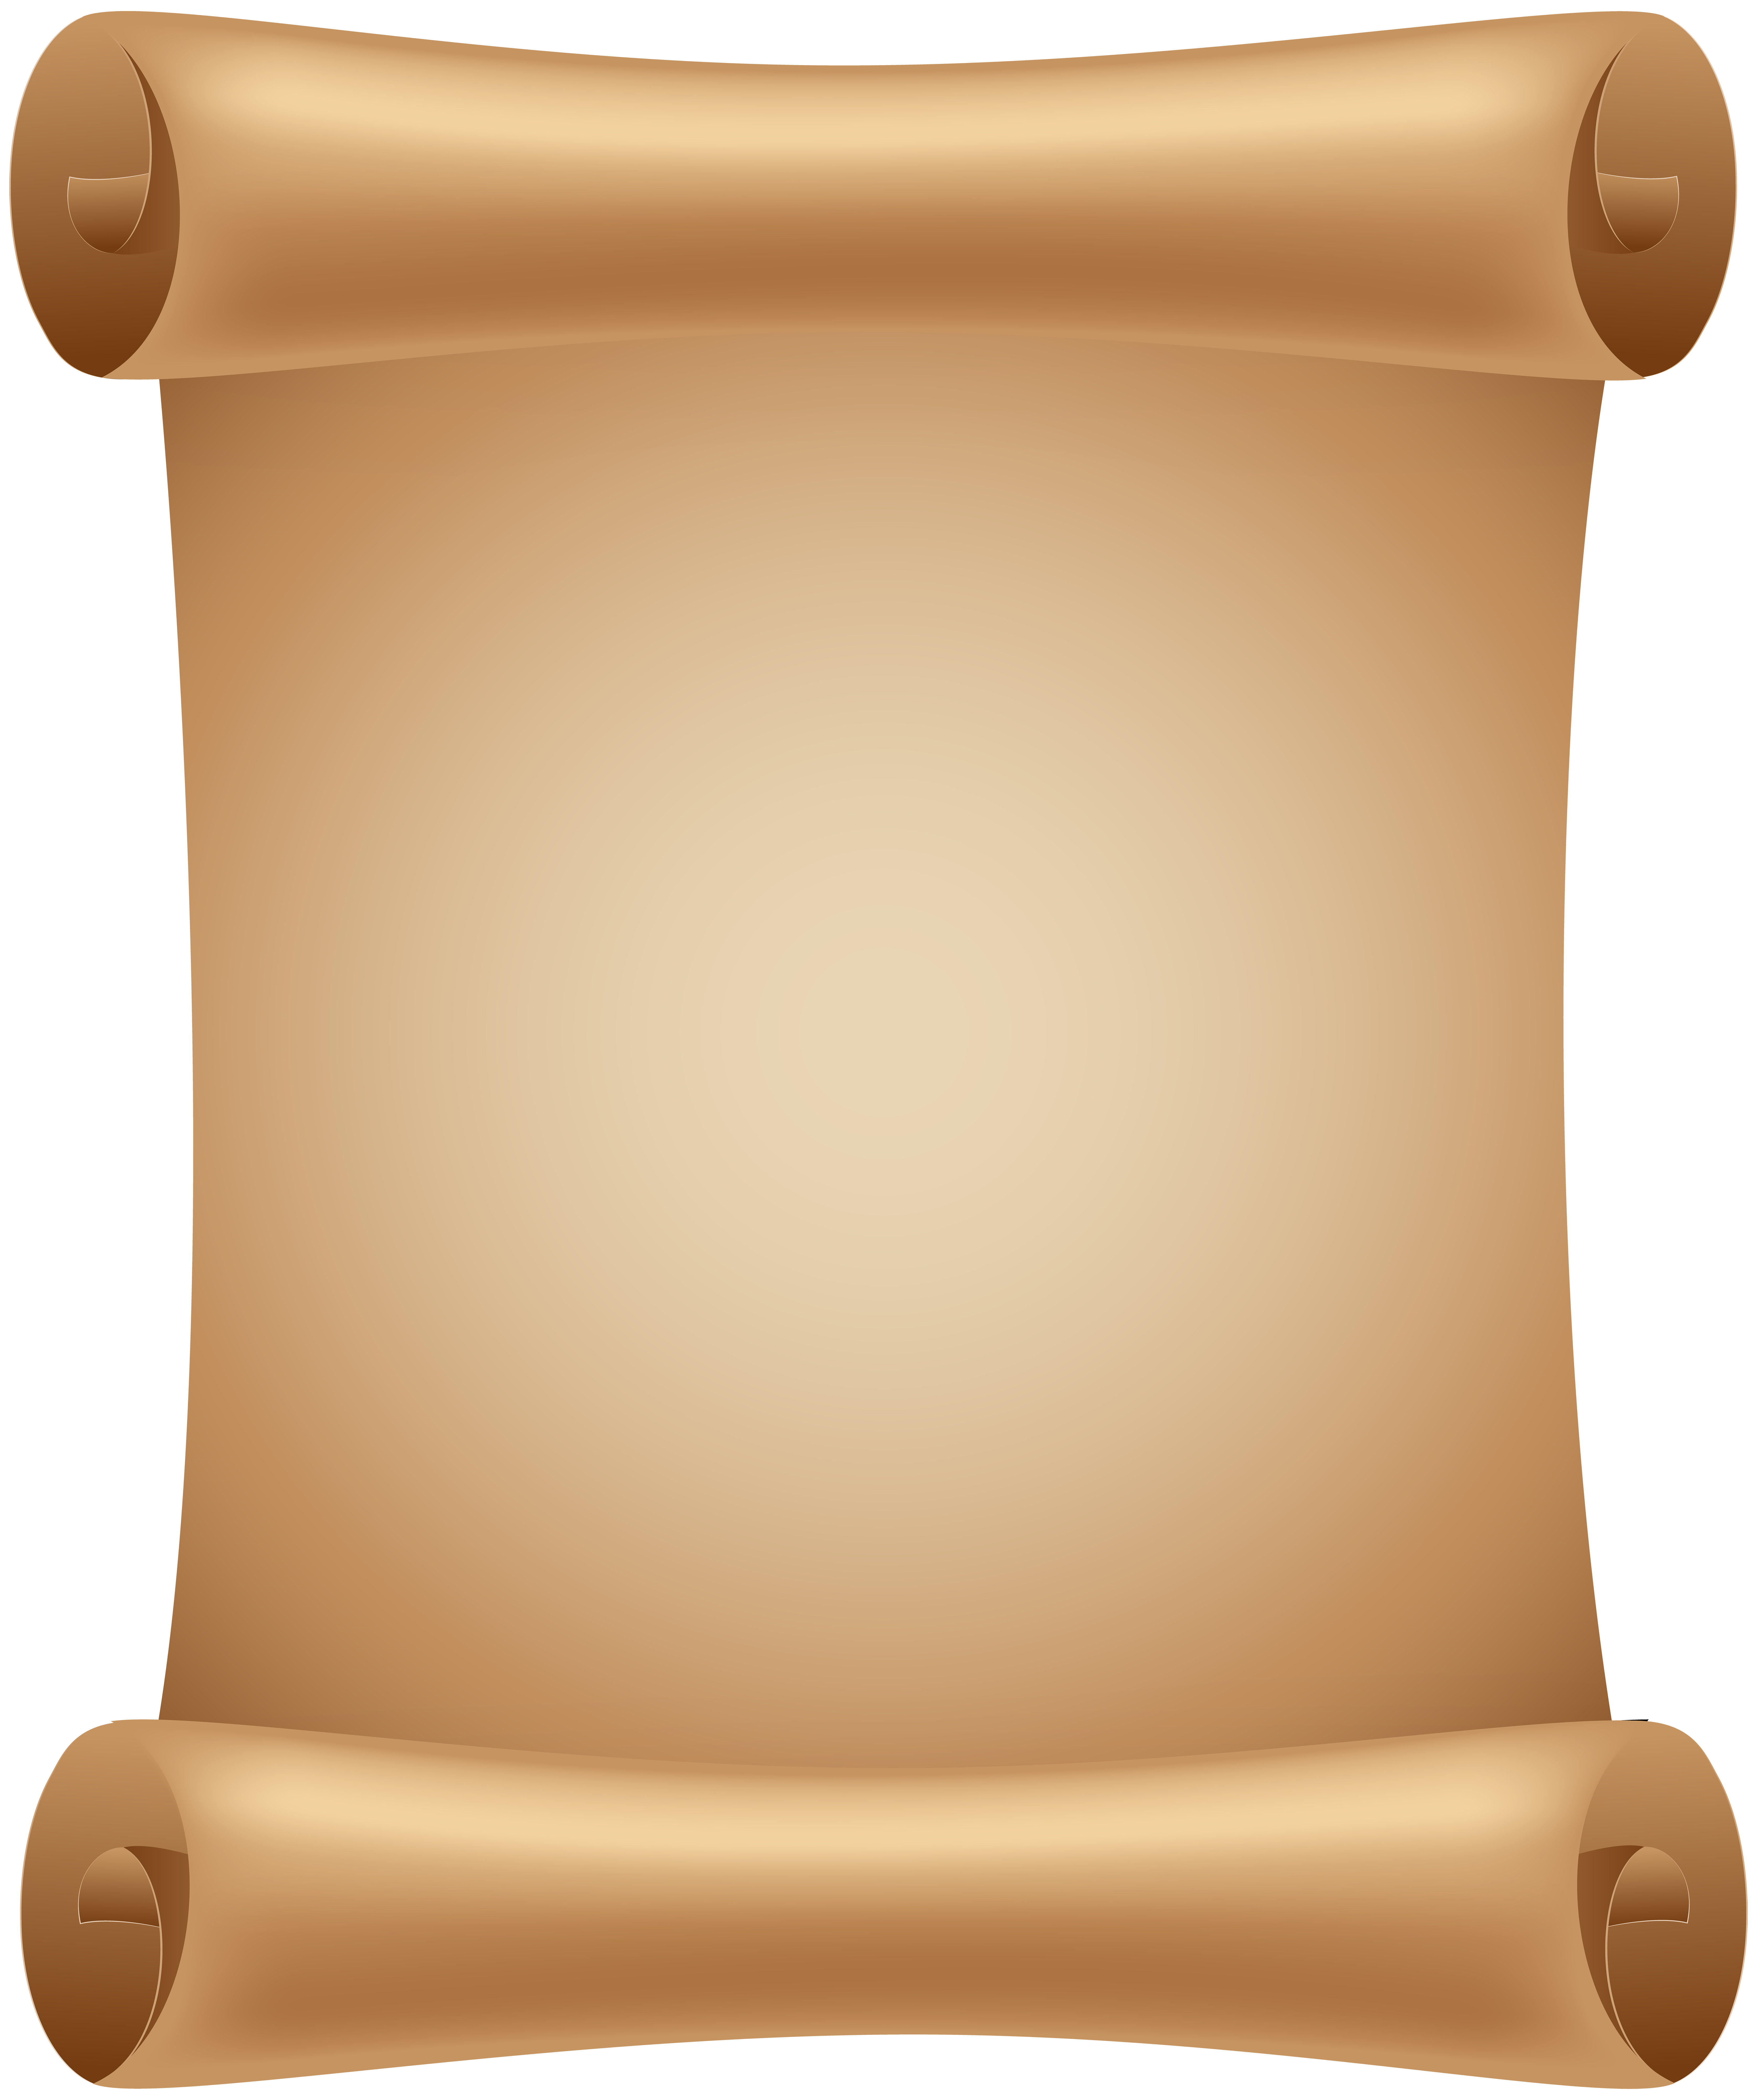 Scroll png images